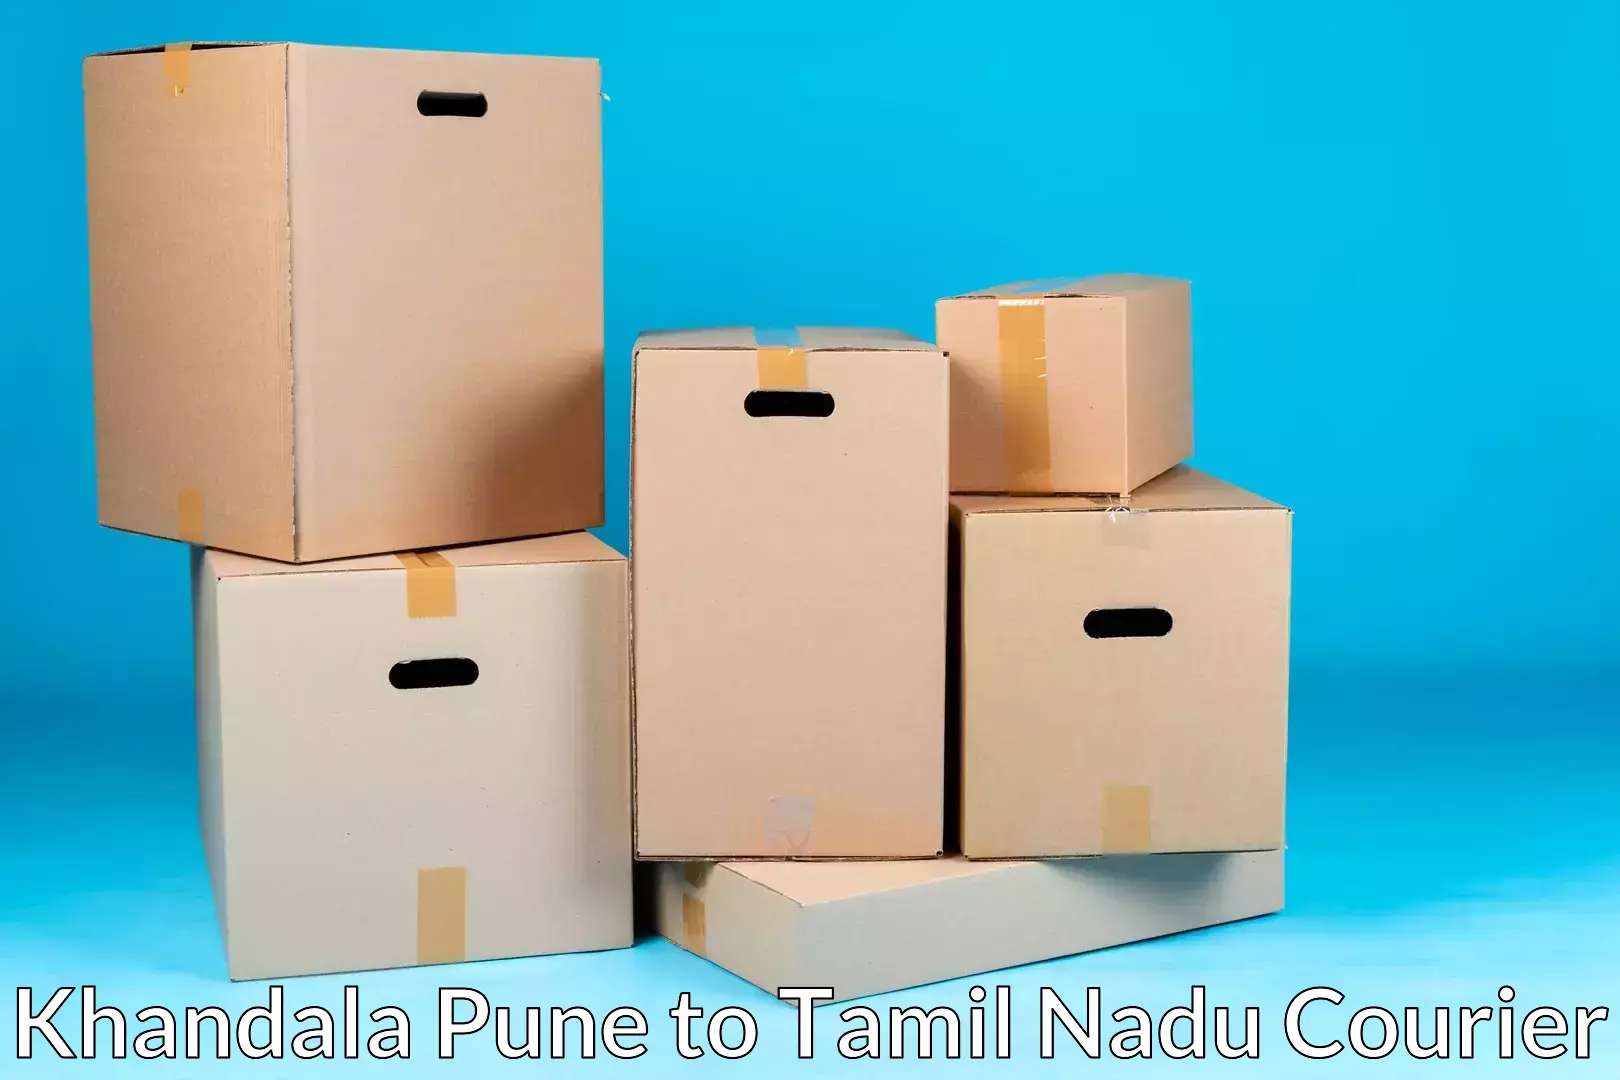 Trusted relocation experts Khandala Pune to Tamil Nadu